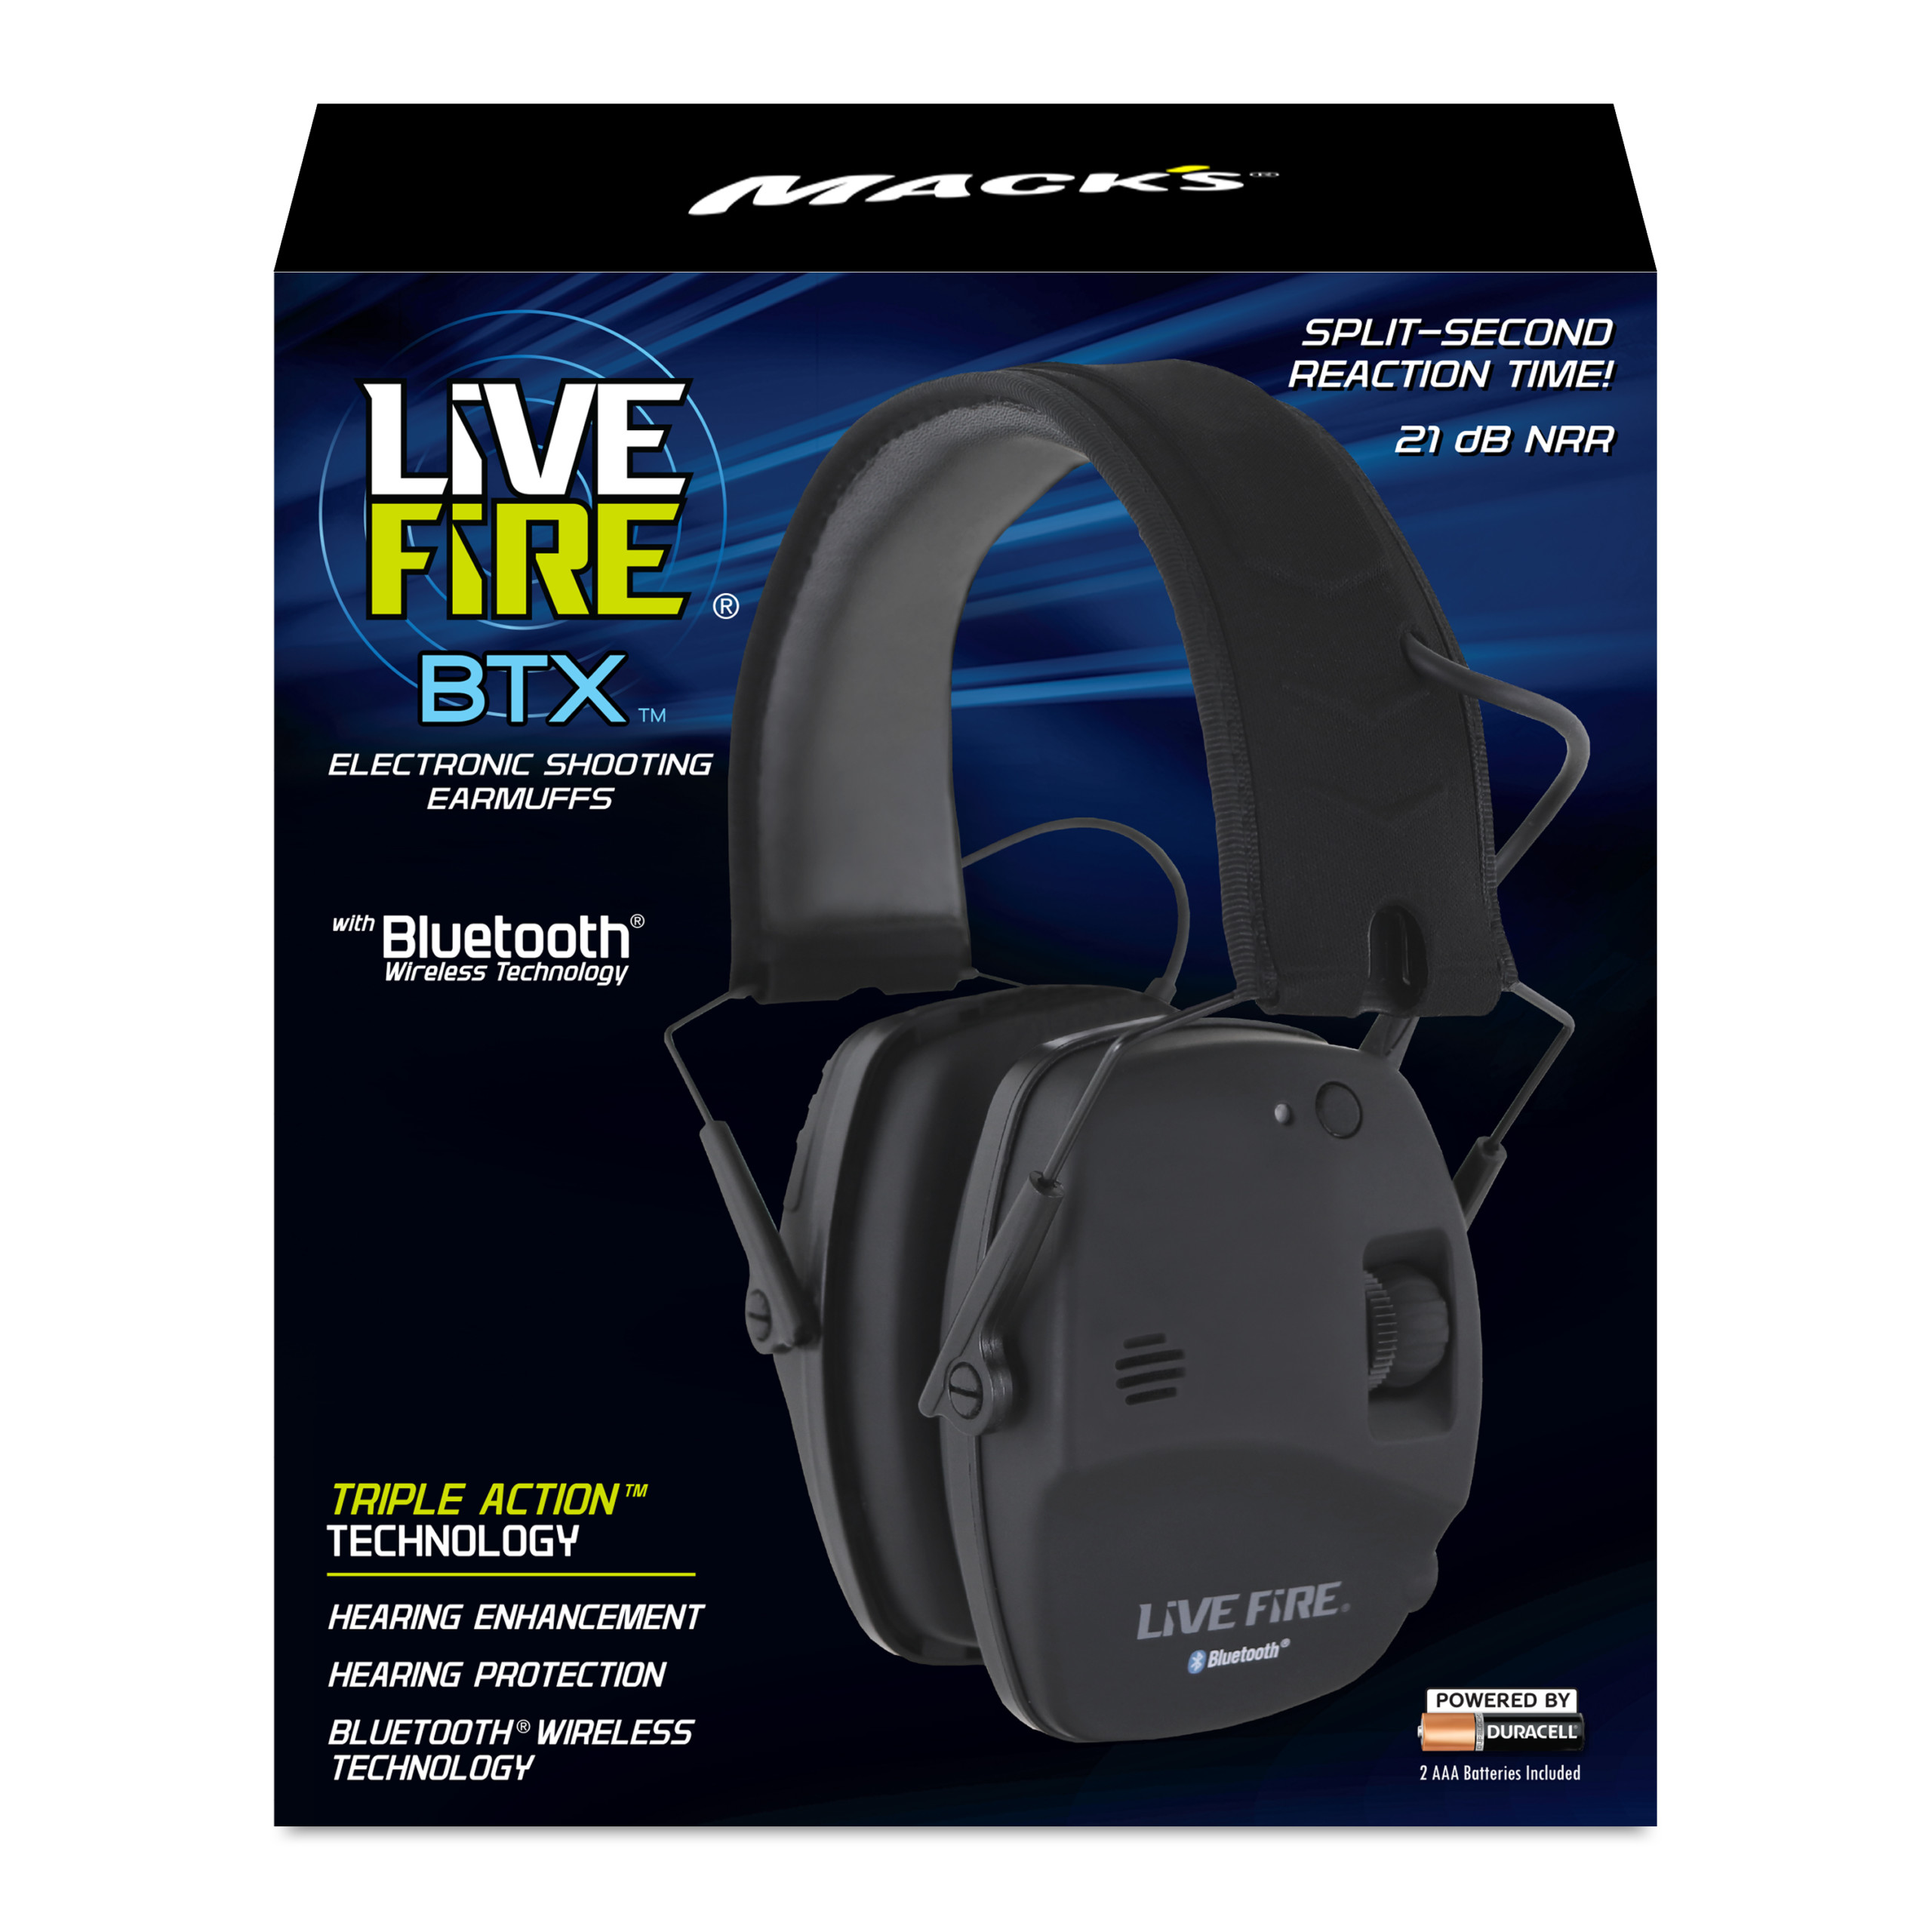 macks live fire btx electronic shooting earmuffs best ear muffs for shooting wireless bluetooth technology ambient sound amplification auto noise compression omnidirectional microphones slim low profile batteries included